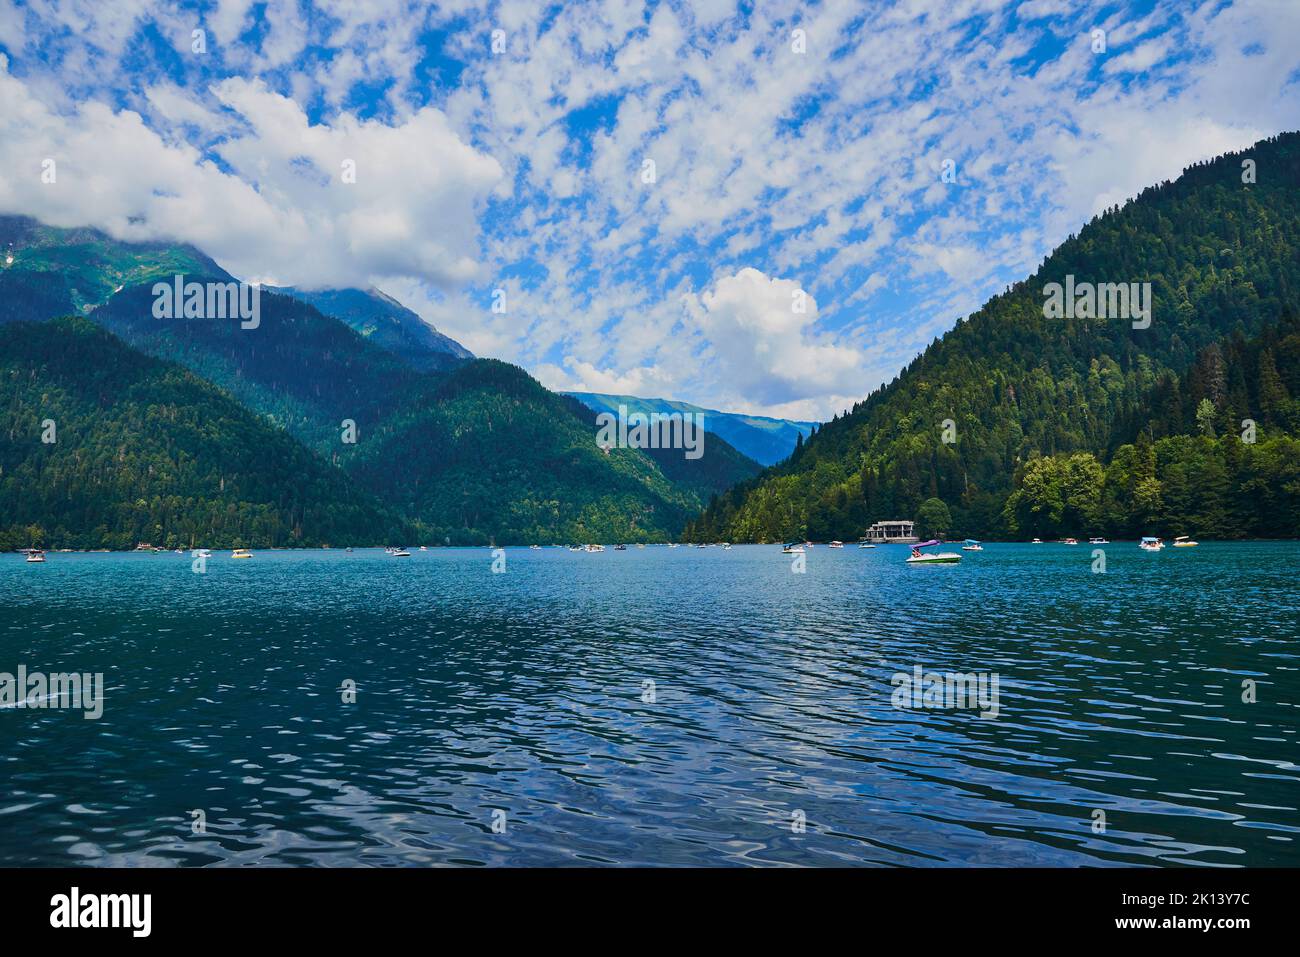 Lake Ritsa is a lake in the Caucasus Mountains in Abkhazia region. Summer bright landscape. Stock Photo